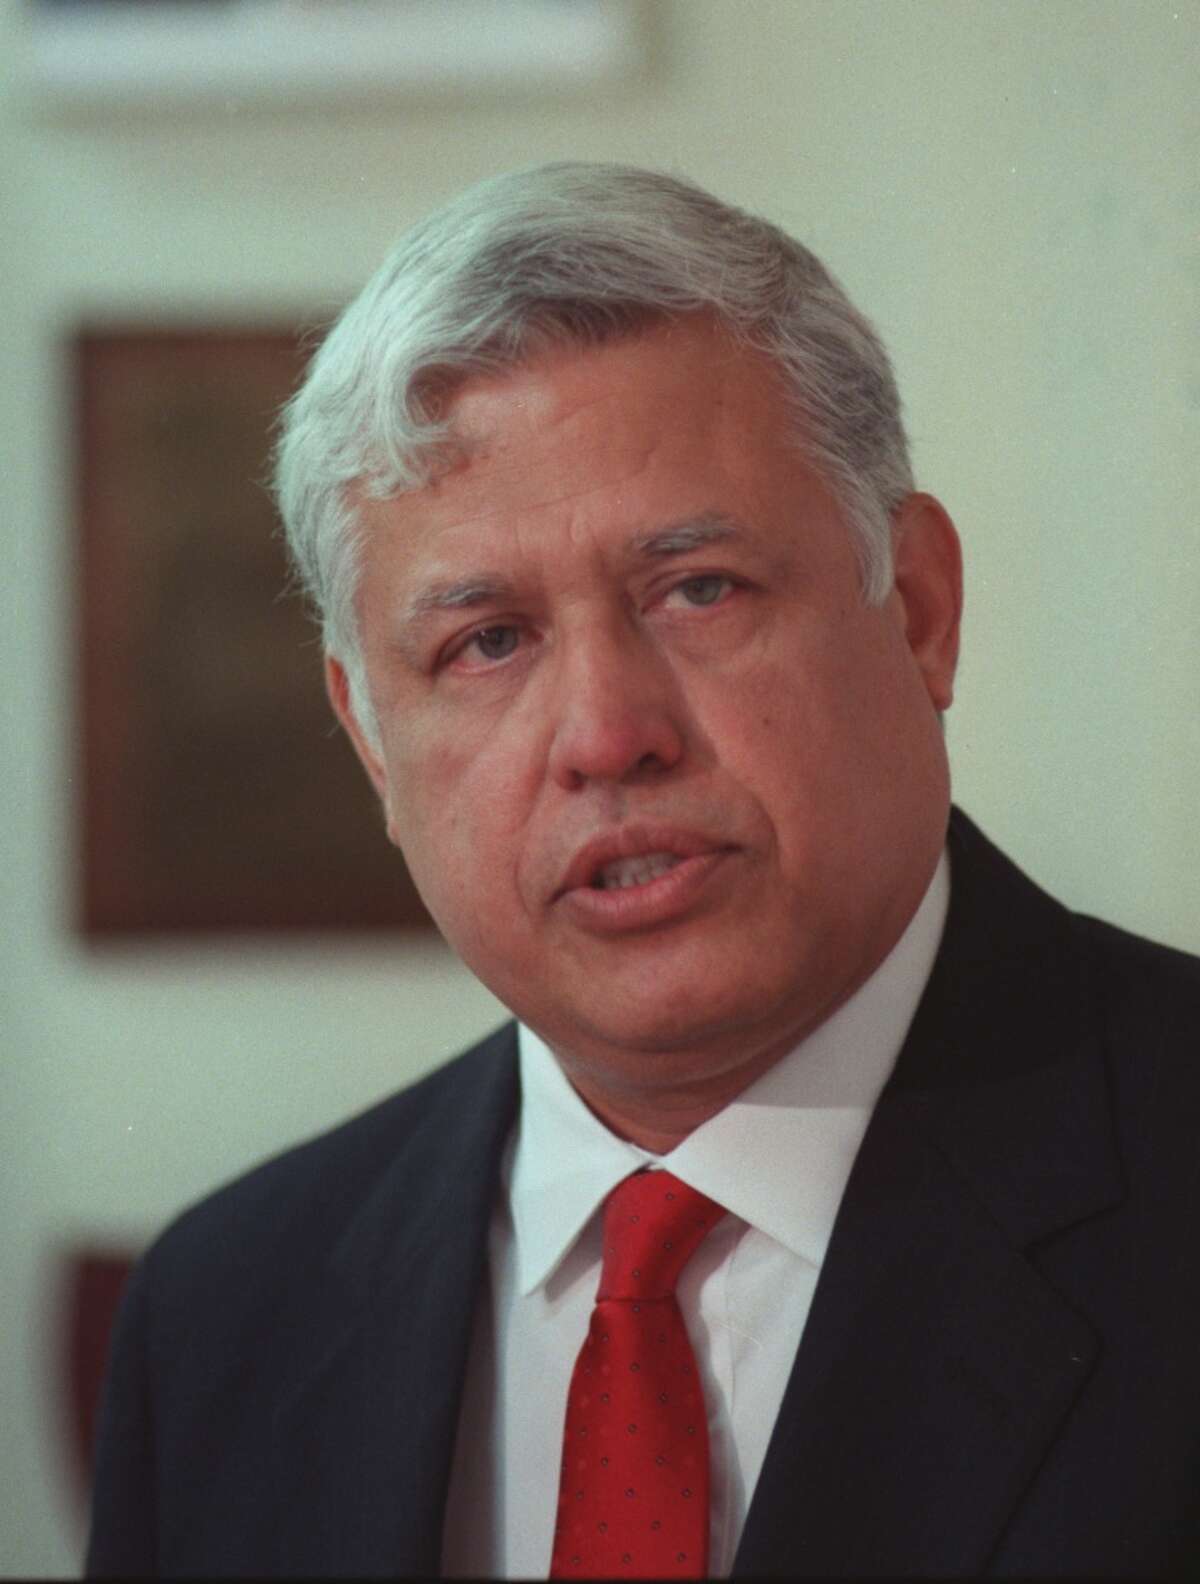 Leonel CastilloFrom: Victoria, Texas Houston's first Latino elected official and ex-comptroller.